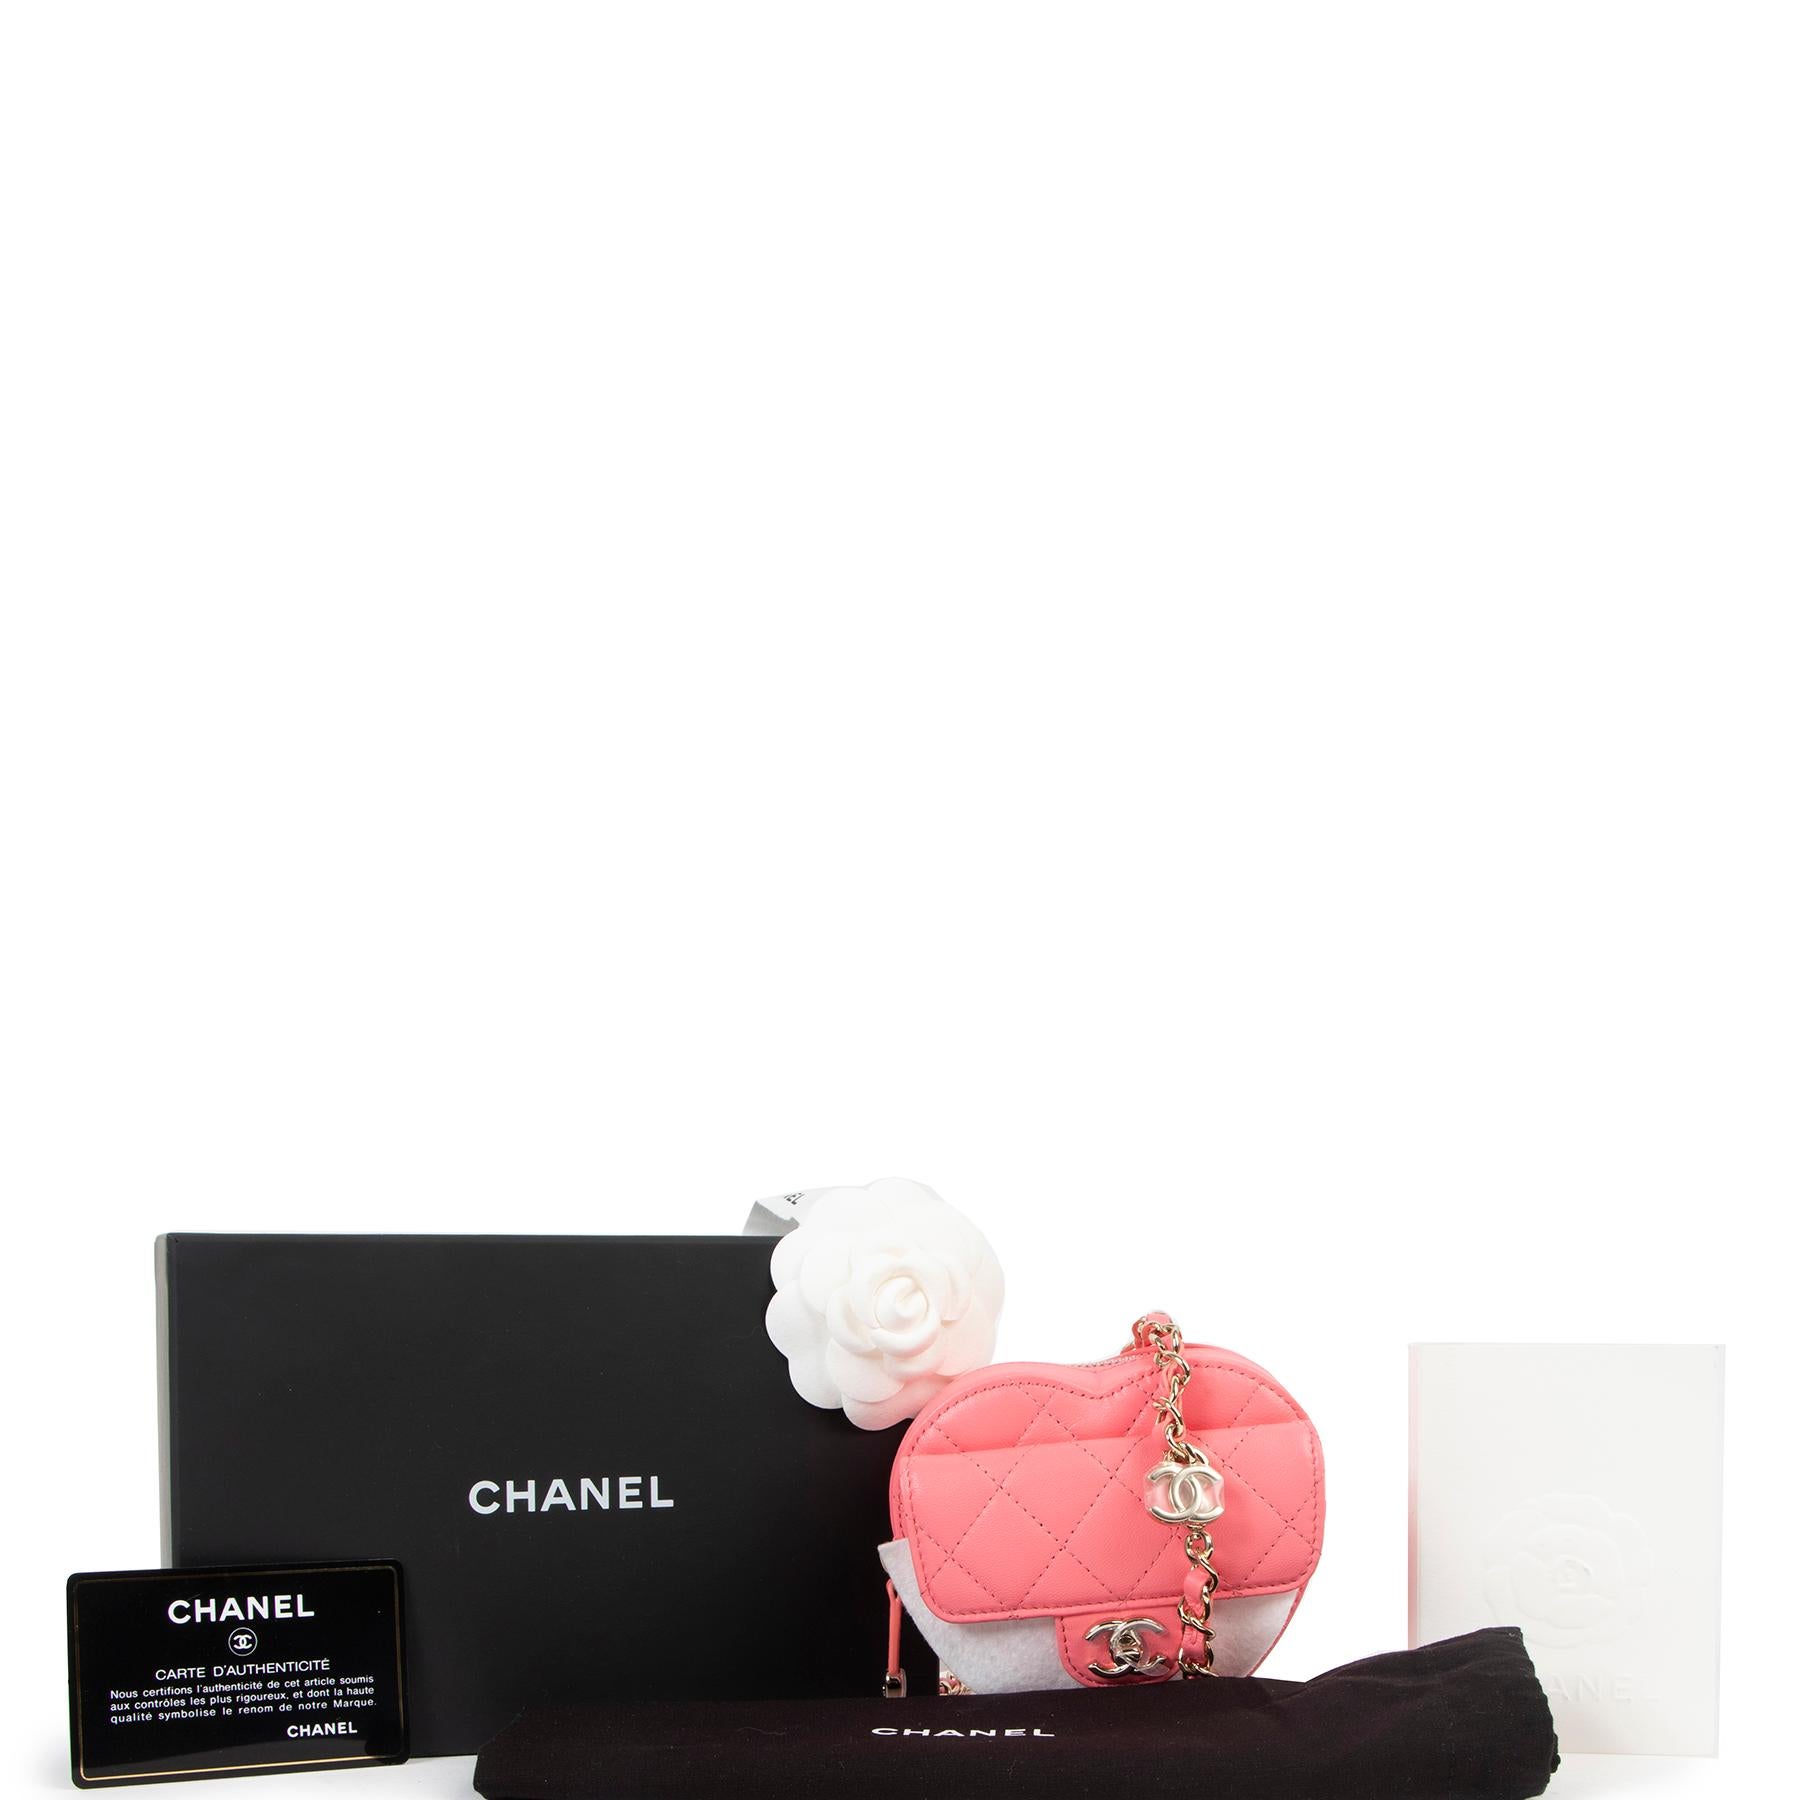 VERY RARE & IMPOSSIBLE to find Chanel Spring/Summer 2022 Pink Lambskin Heart Belt Bag

Our heart skipped a beat! Go all the way out and make a statement with this Chanel Heart Belt Bag fresh off the Spring/Summer 2022 Runway. 

Made from delicate